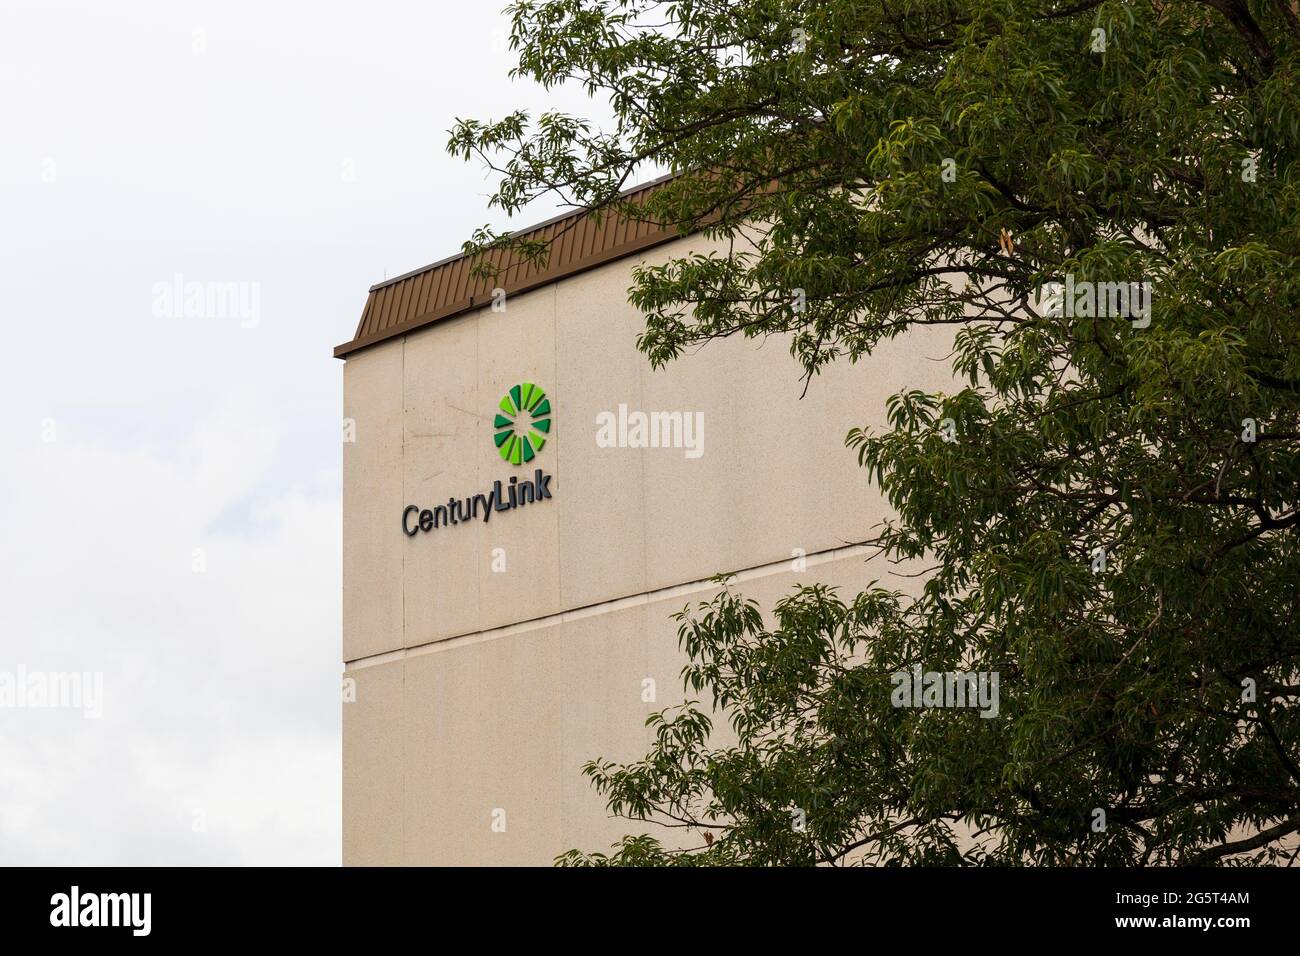 HICKORY, NC, USA-22 JUNE 2021: Top corner of CenturyLink building showing name sign and logo. Stock Photo